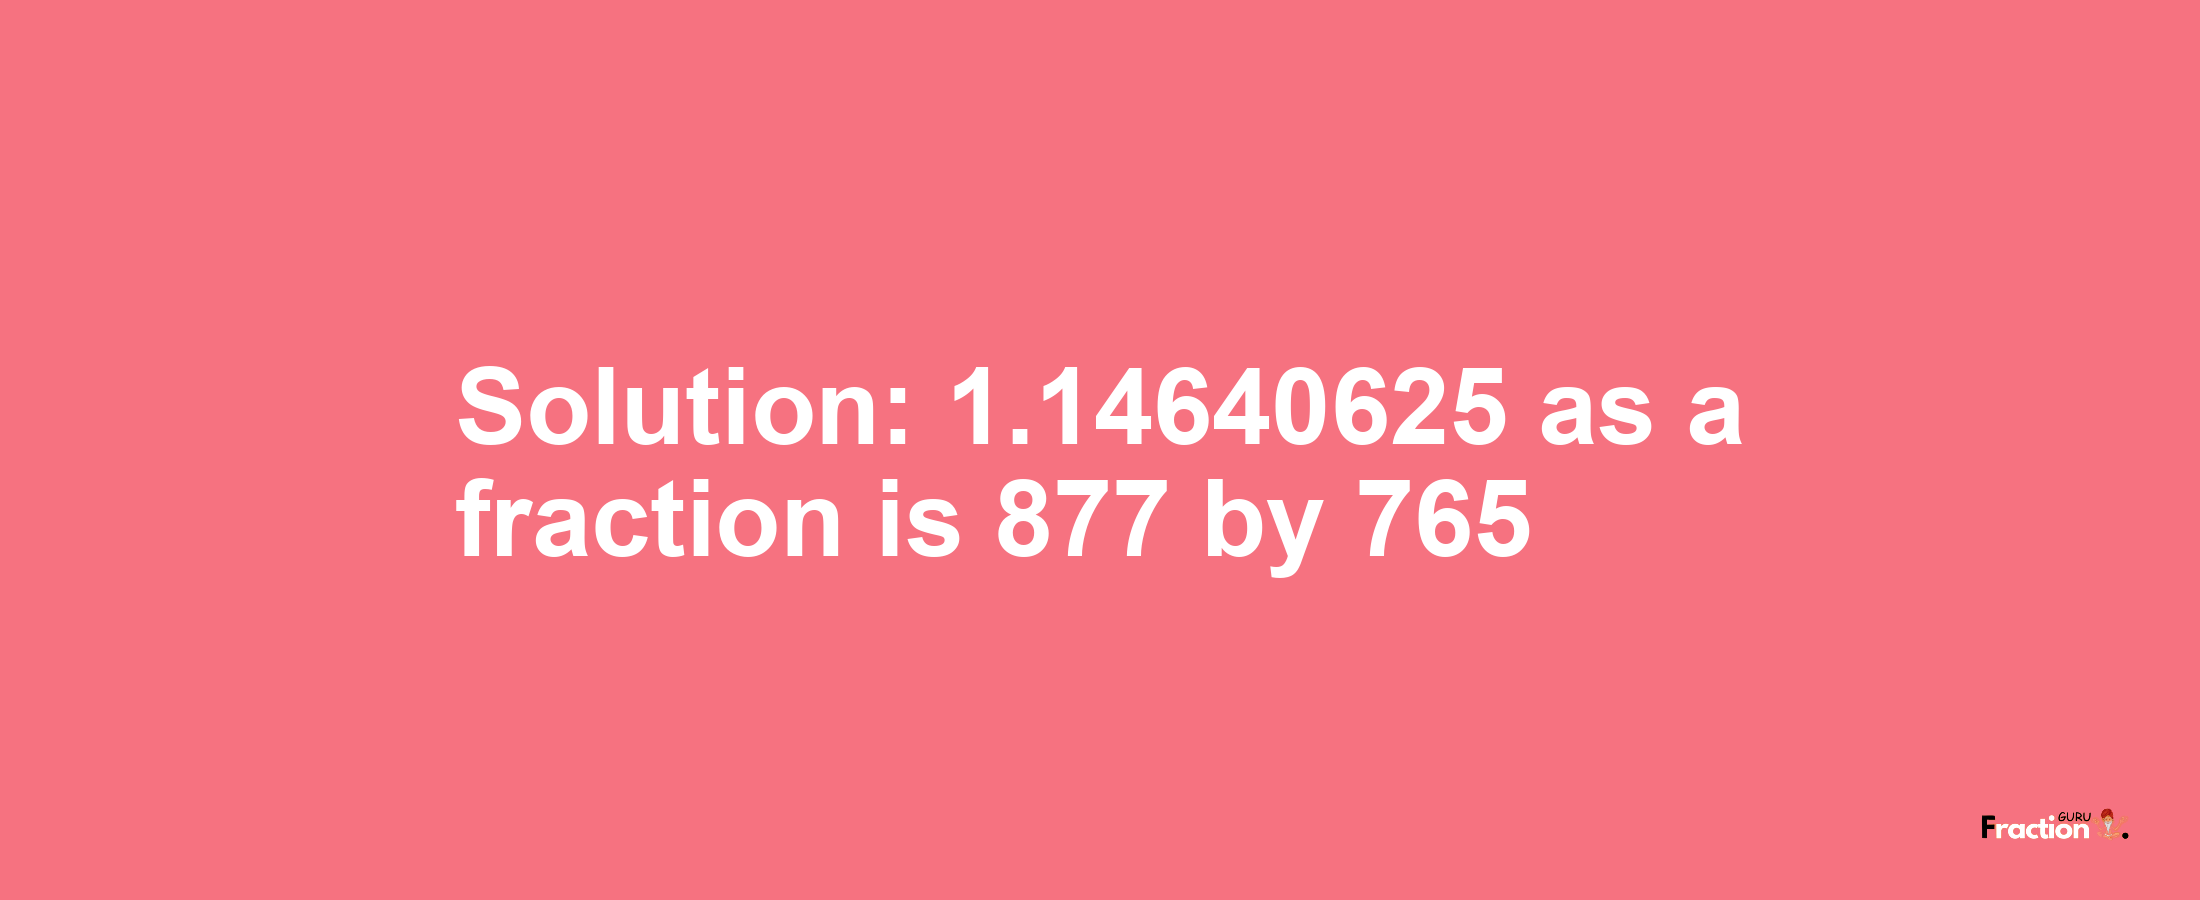 Solution:1.14640625 as a fraction is 877/765